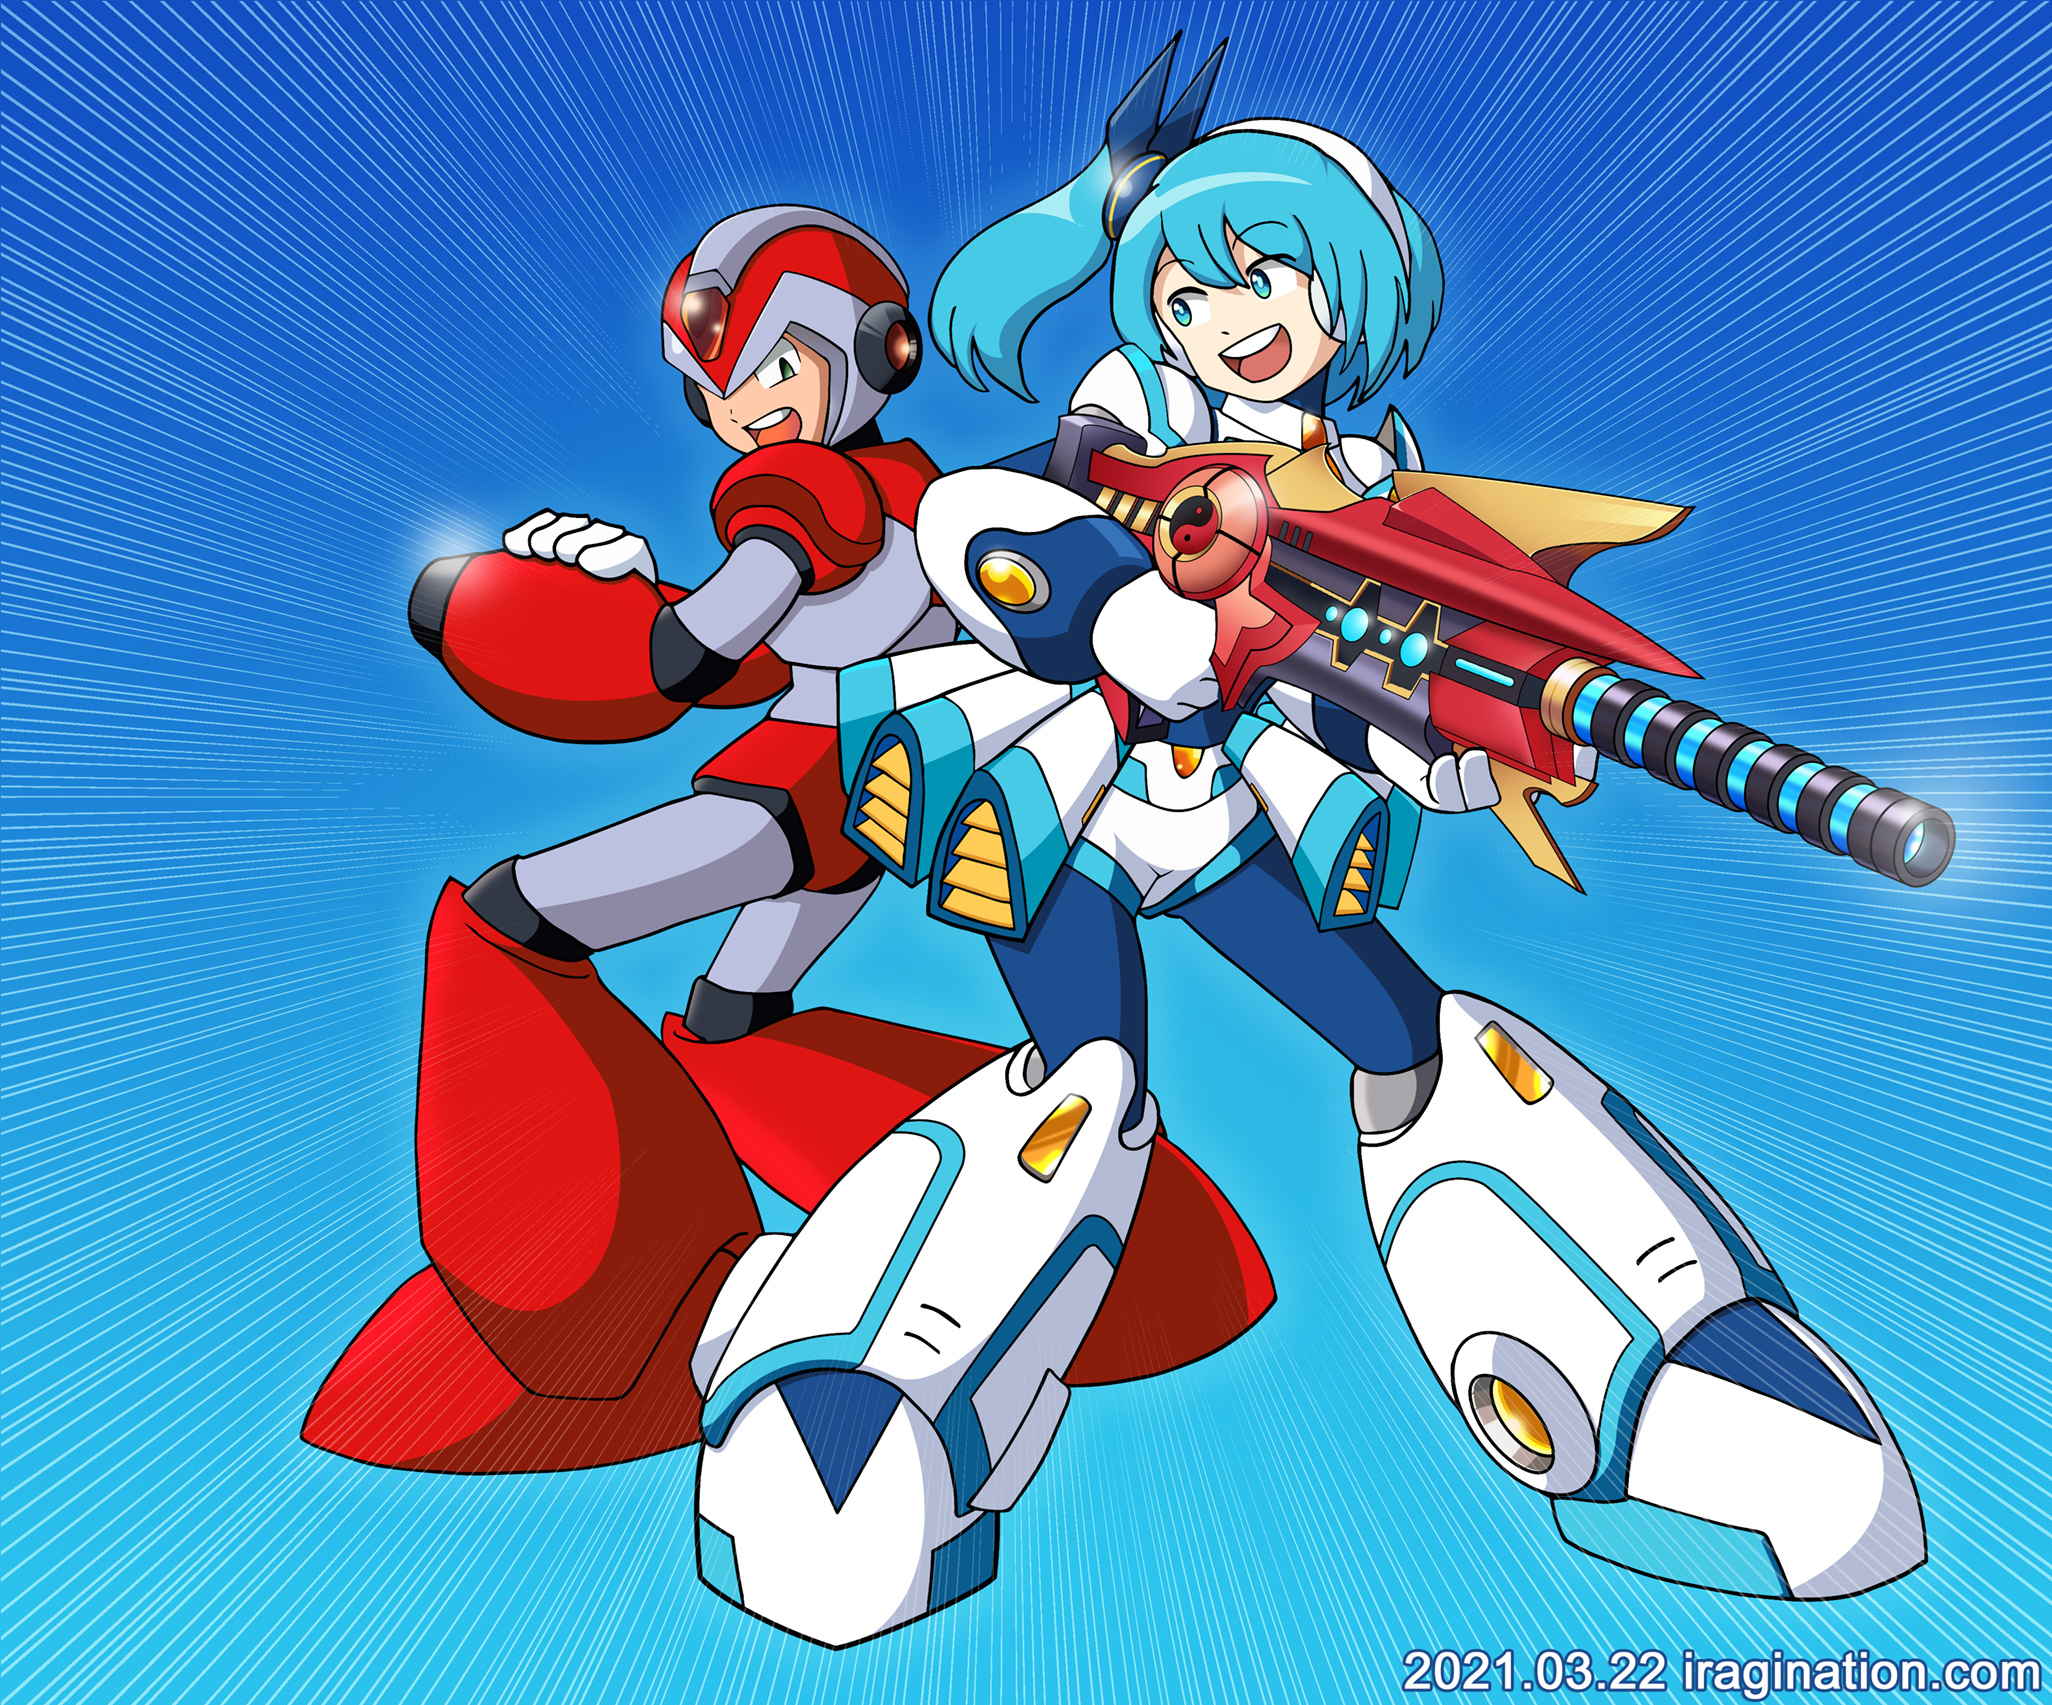 RiCO and X (Rising Fire Ver.) - Rockman X DiVE
[url=https://www.facebook.com/CAPCOM.RXD/posts/719754638720628]RiCO became a playable character[/url] in Rockman X DiVE. During the event released for this update, she was extremely happy of announcing this new development. I wanted to convey with her expression the excitement of finally becoming a Hunter Program.

The weapon she's carrying is called the [url=https://www.facebook.com/CAPCOM.RXD/posts/576378516391575]Savage Tusk of Thunder[/url]. It was released last year. I don't have it myself, but for some reason, she's using it during the demonstration video, so I wanted to give it a go at drawing it. Design-wise some of these weapons are quite intimidating and I'd rather avoid drawing them, but this one was something in between and I did not want to put some hand-drawn rushed artwork so I worked on it on Illustrator.

In this update, they also released a new A rank Hunter Program called [i]X (Rising Fire Ver.)[/i]. I don't remember drawing a palette-swap of X before, so perhaps this is the first time. For me, X is the banner character of this game alongside RiCO, so I think this was a nice combination for this anniversary update. Player-san or X, you decide!
Keywords: rico x